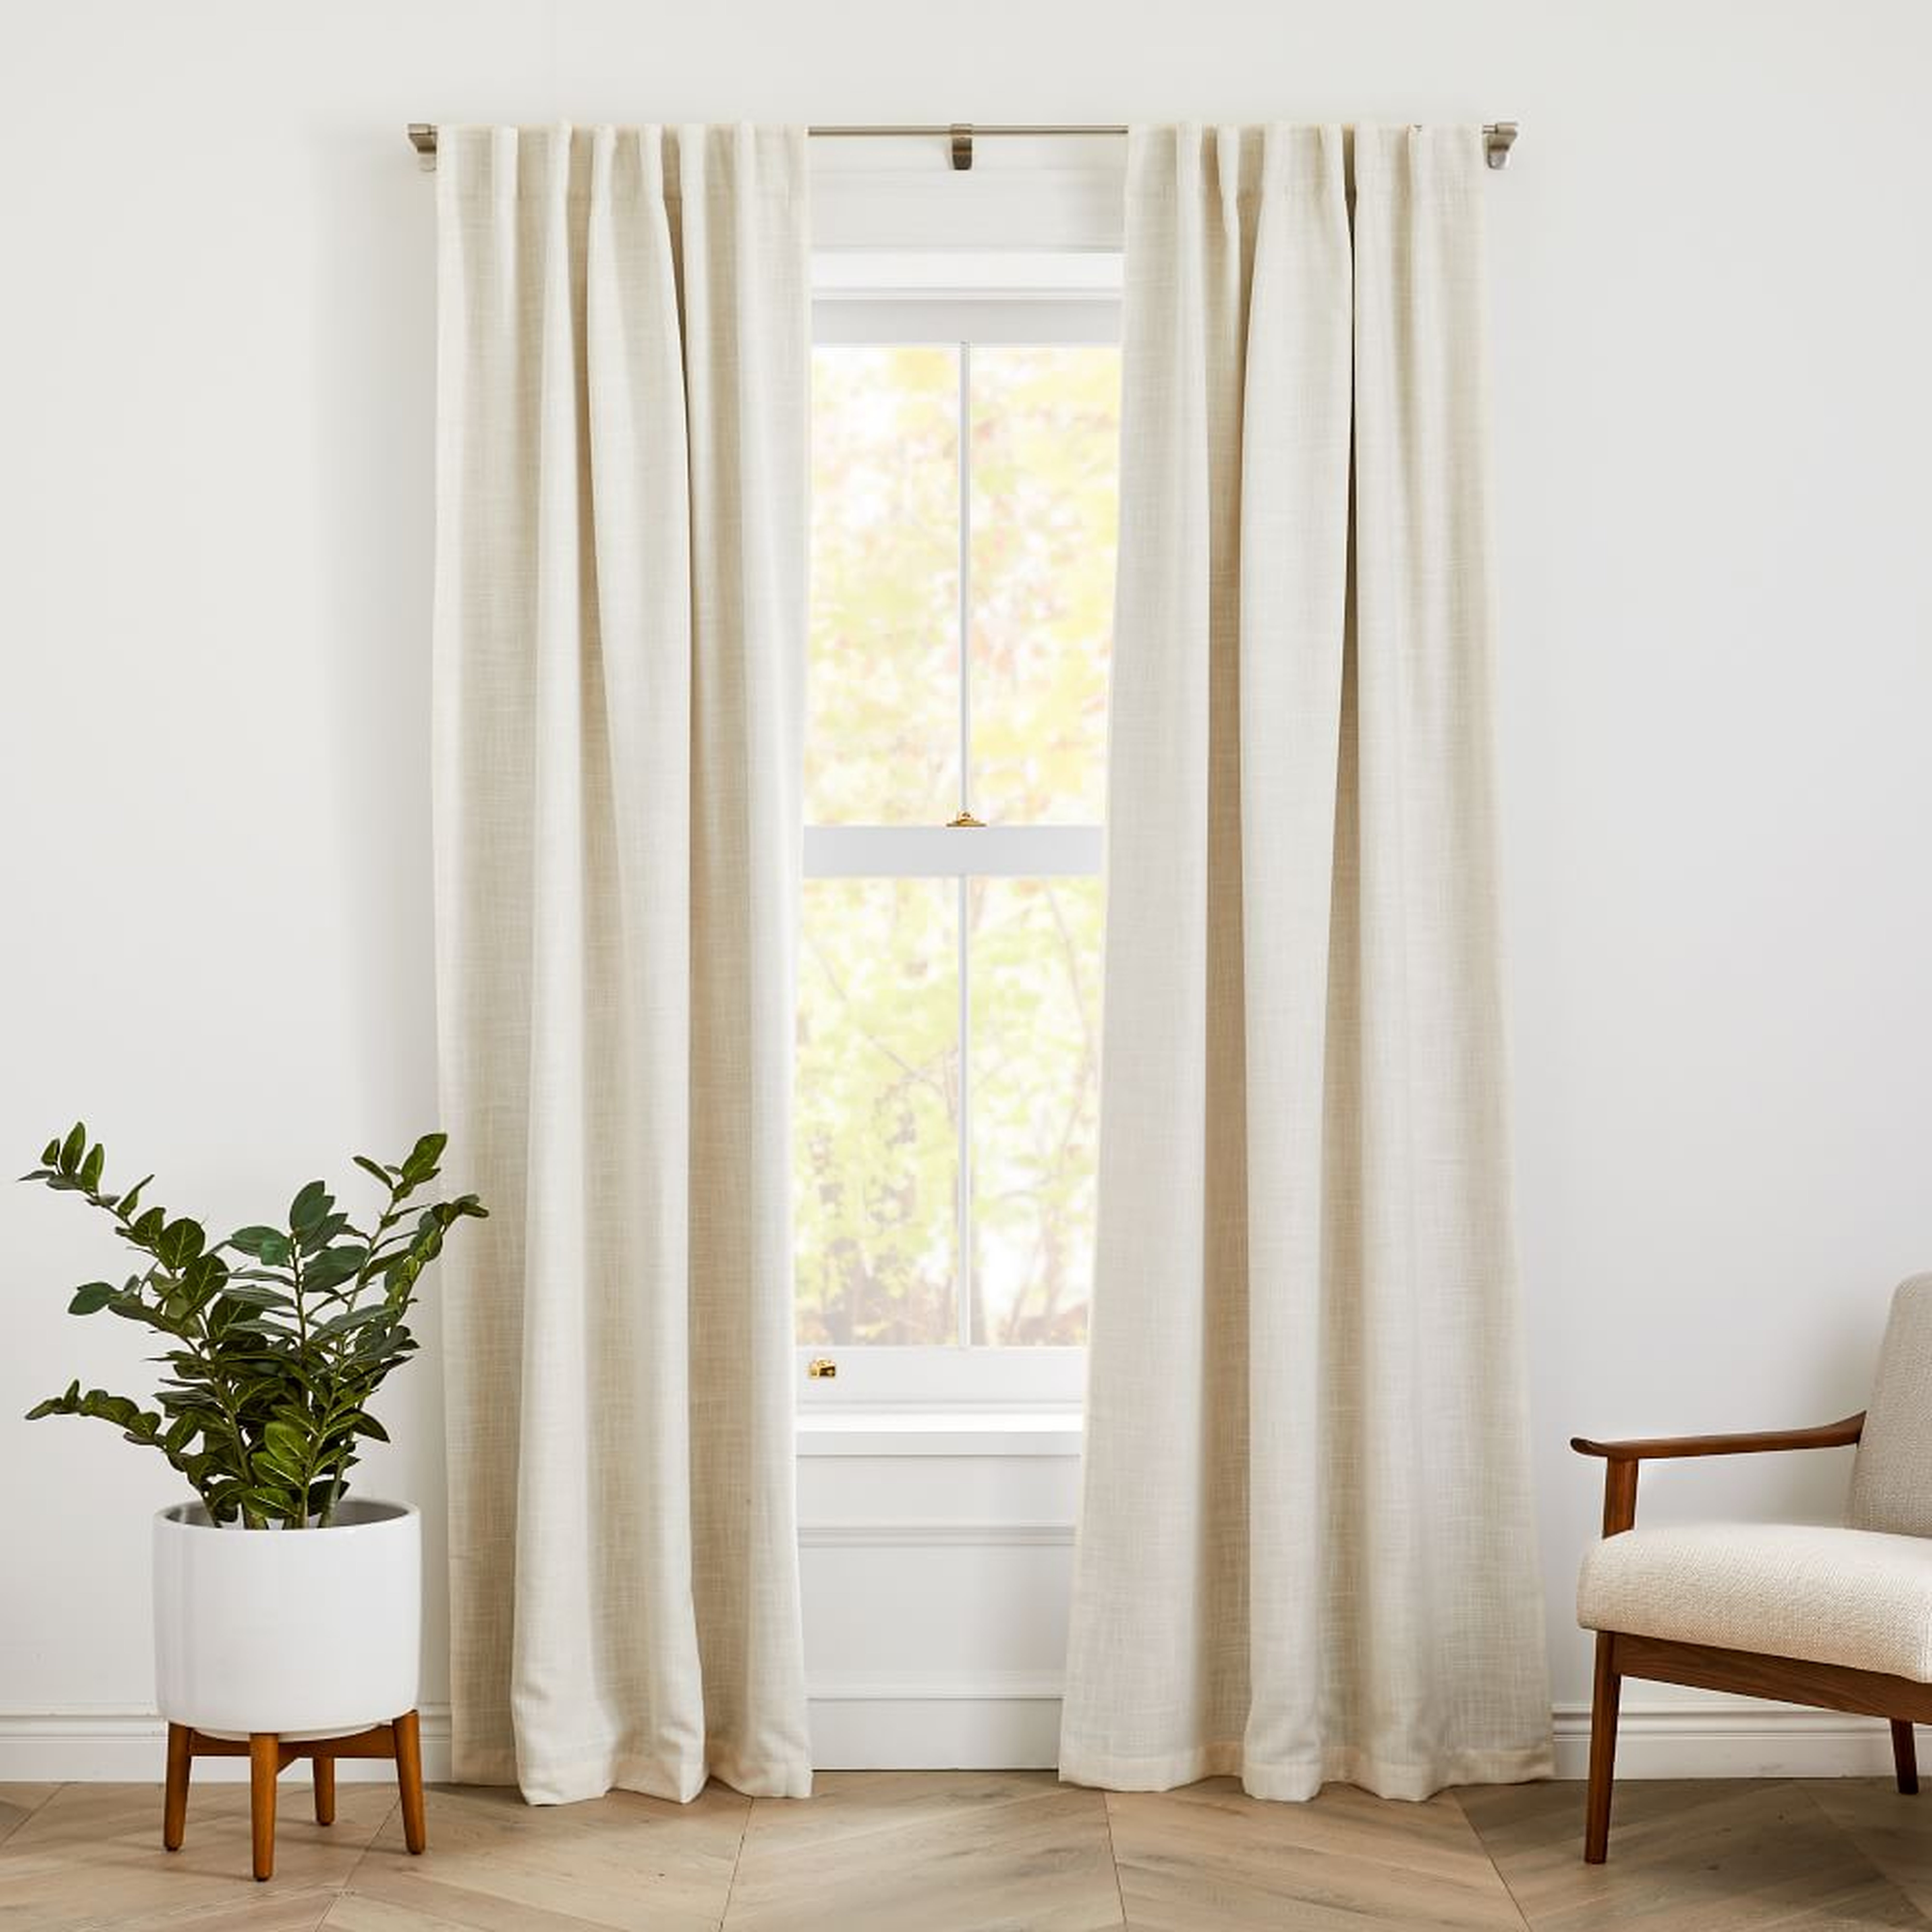 Crossweave Curtain Panel with Black Out Natural Canvas, 48"x96" - West Elm